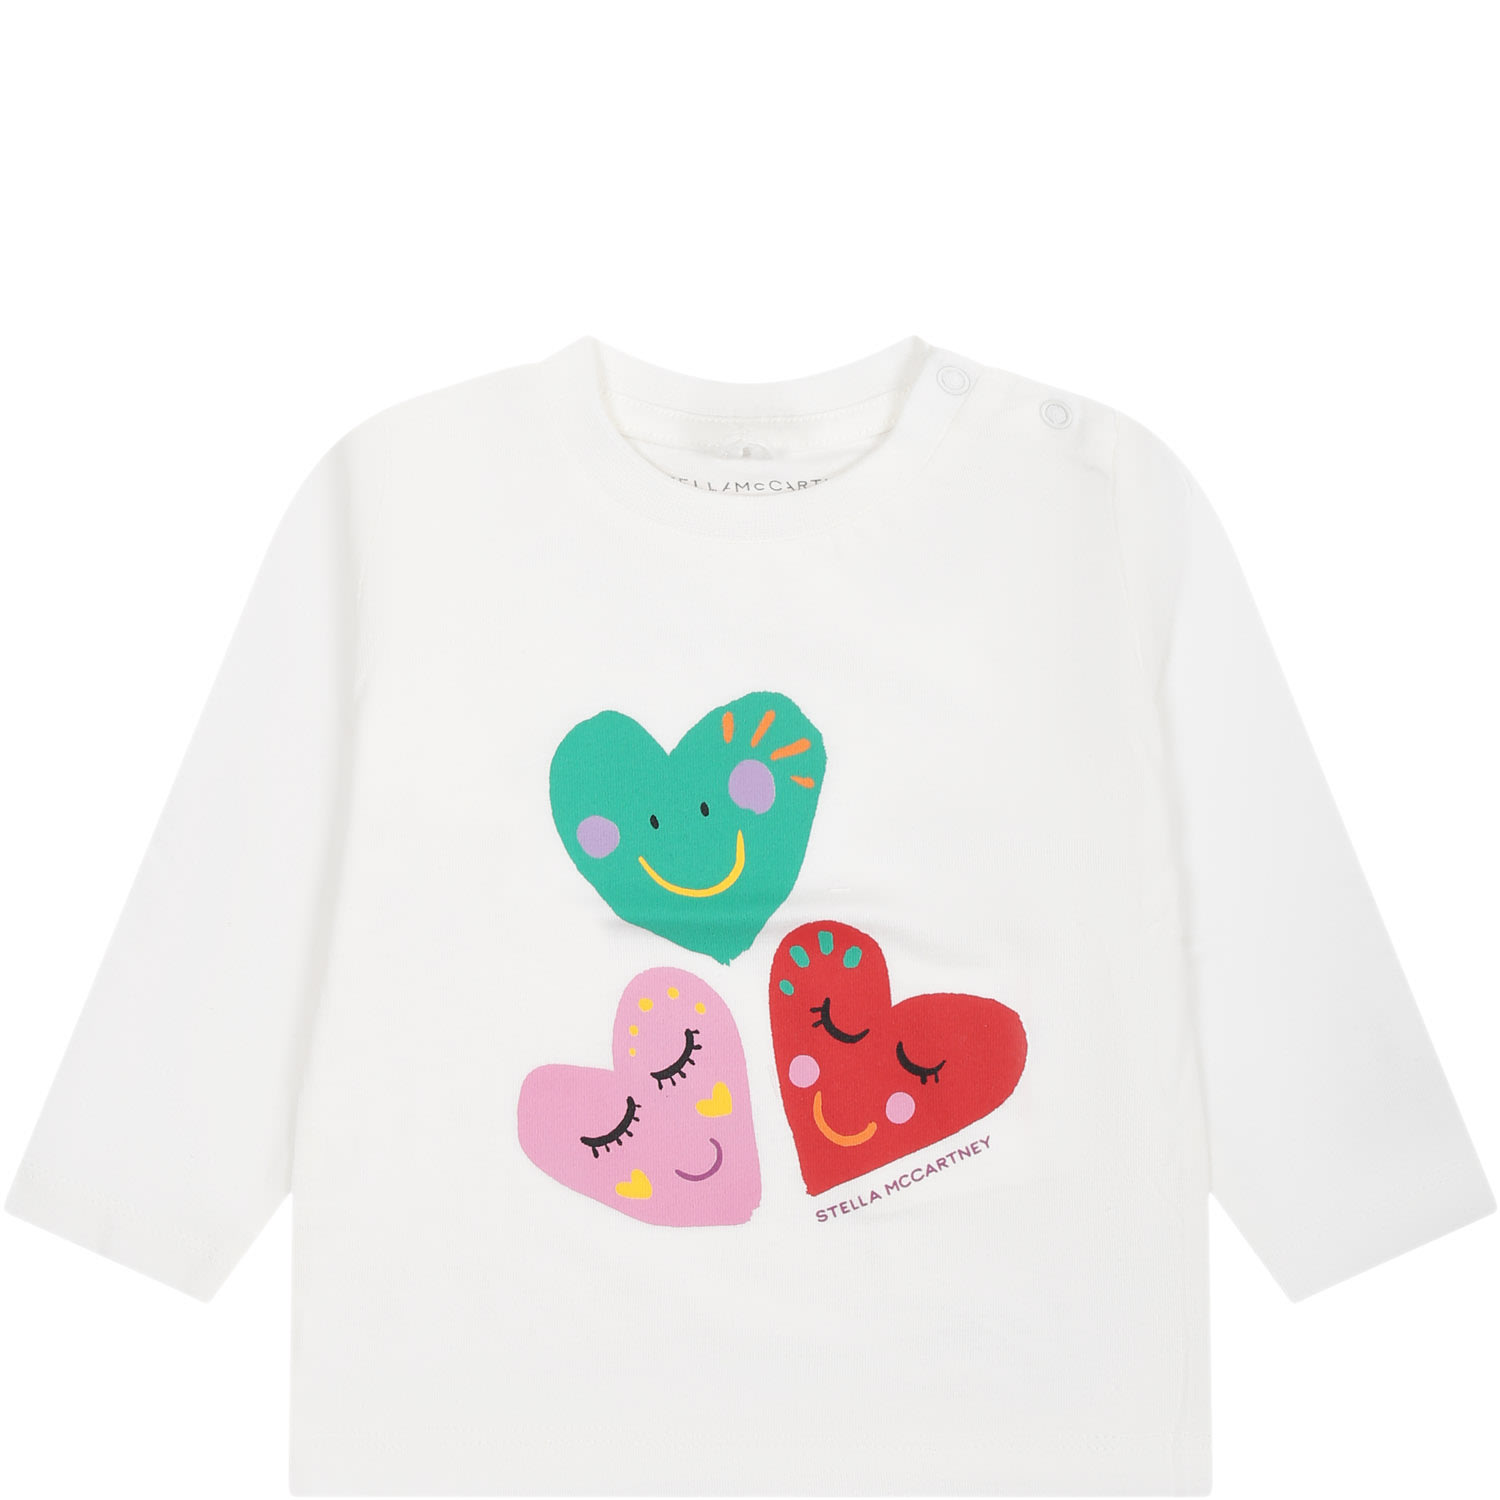 Stella Mccartney Ivory T-shirt For Baby Girl With Heart Print